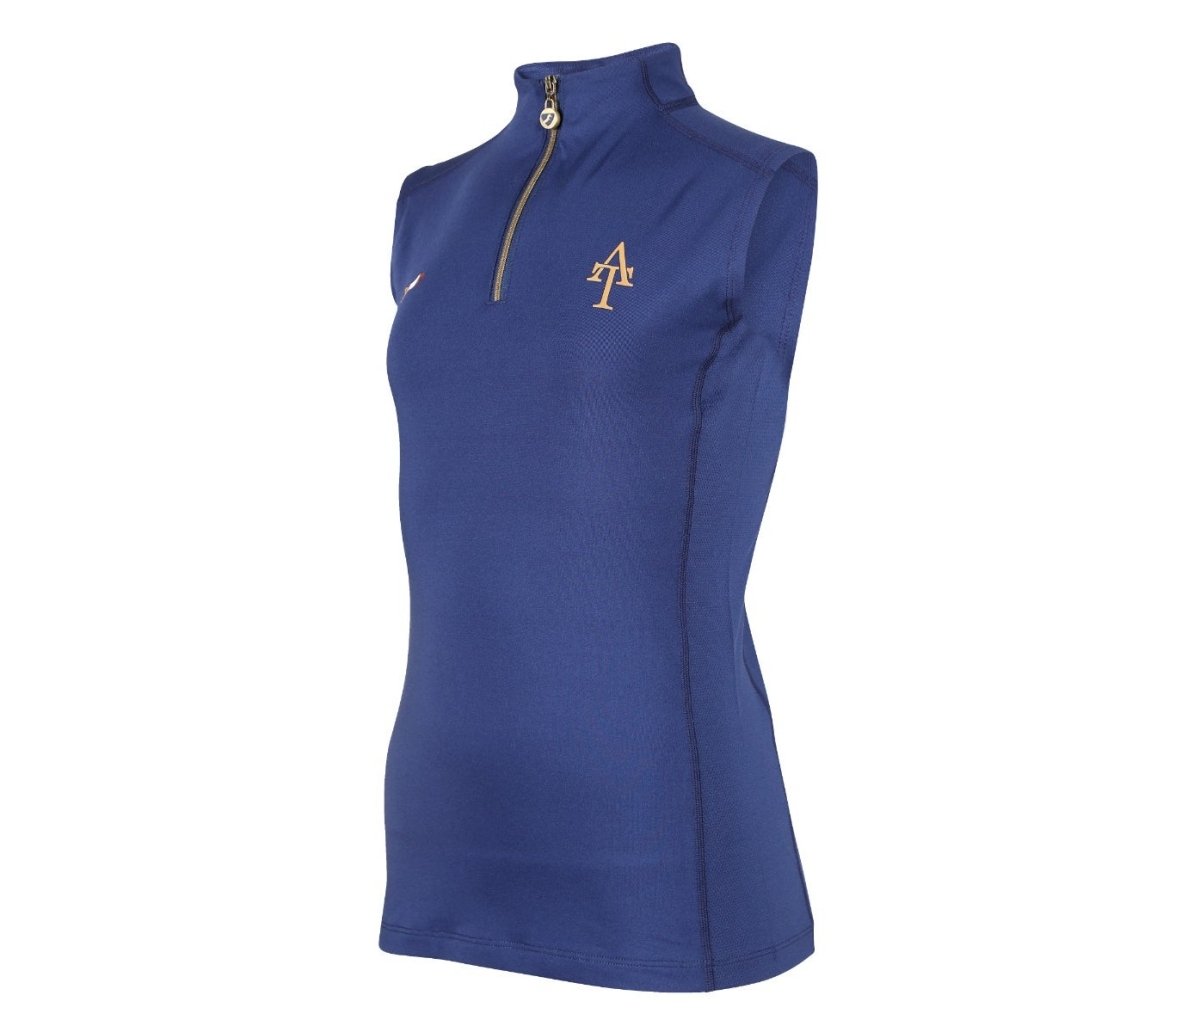 Aubrion SS24 Team Sleeveless Base Layer - Young Rider - Navy - 11/12 Years